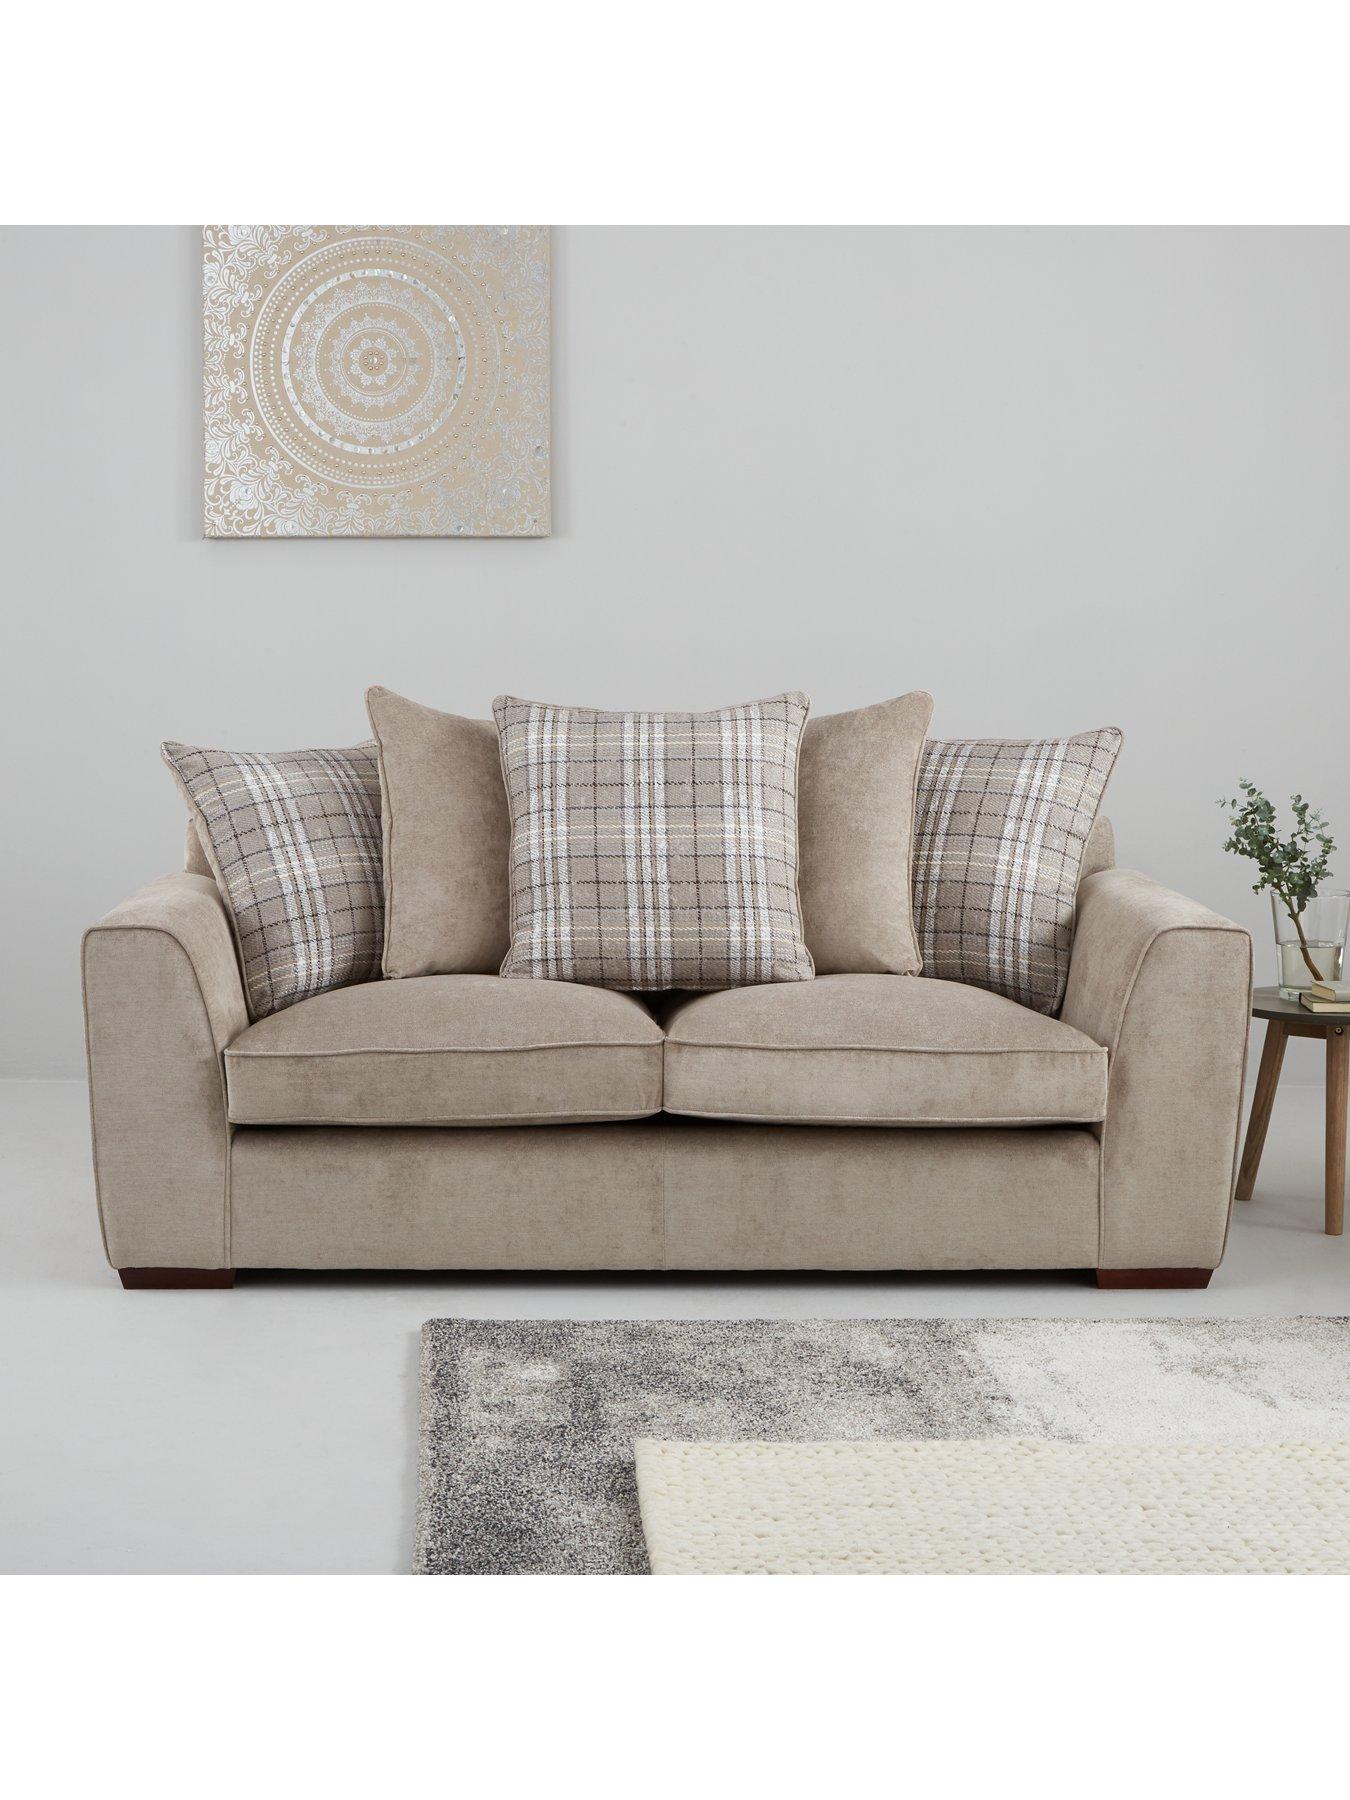 Campbell Fabric 3 Seater 2 Seater Scatter Back Sofa Set Buy And Save